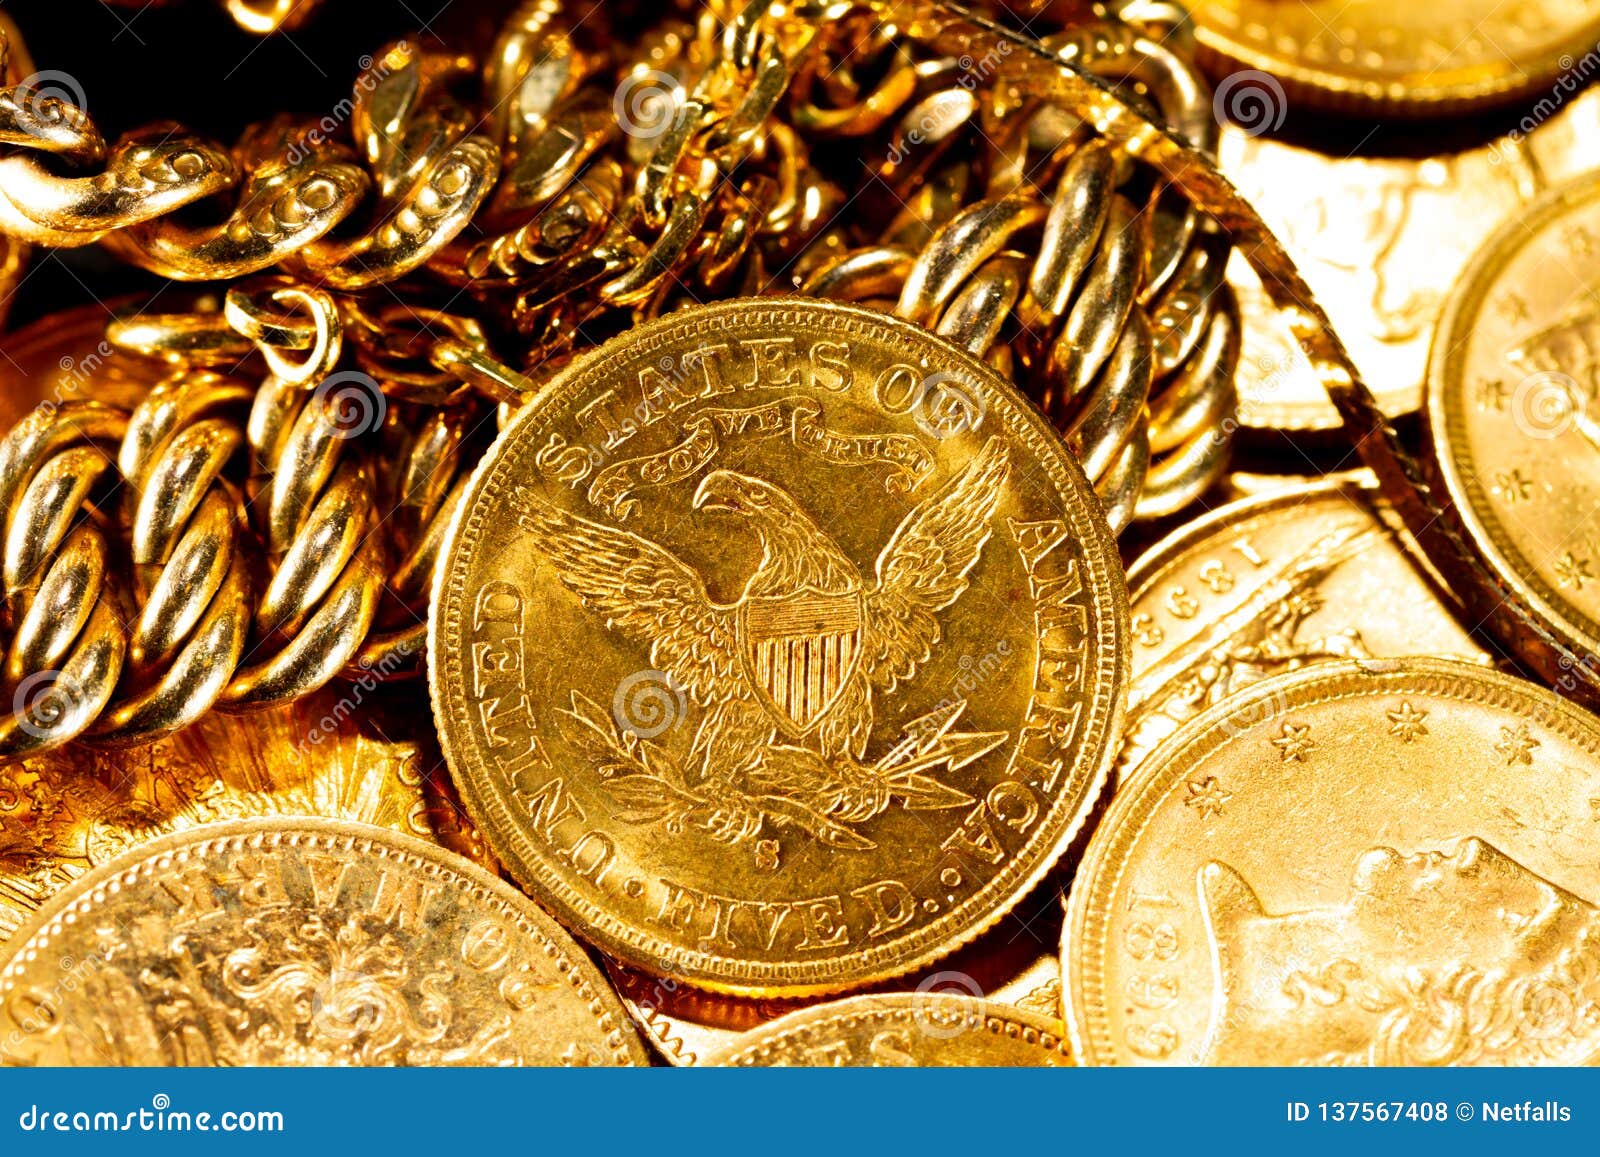 Gold Coins Over Dark Background Stock Photo - Image of collection